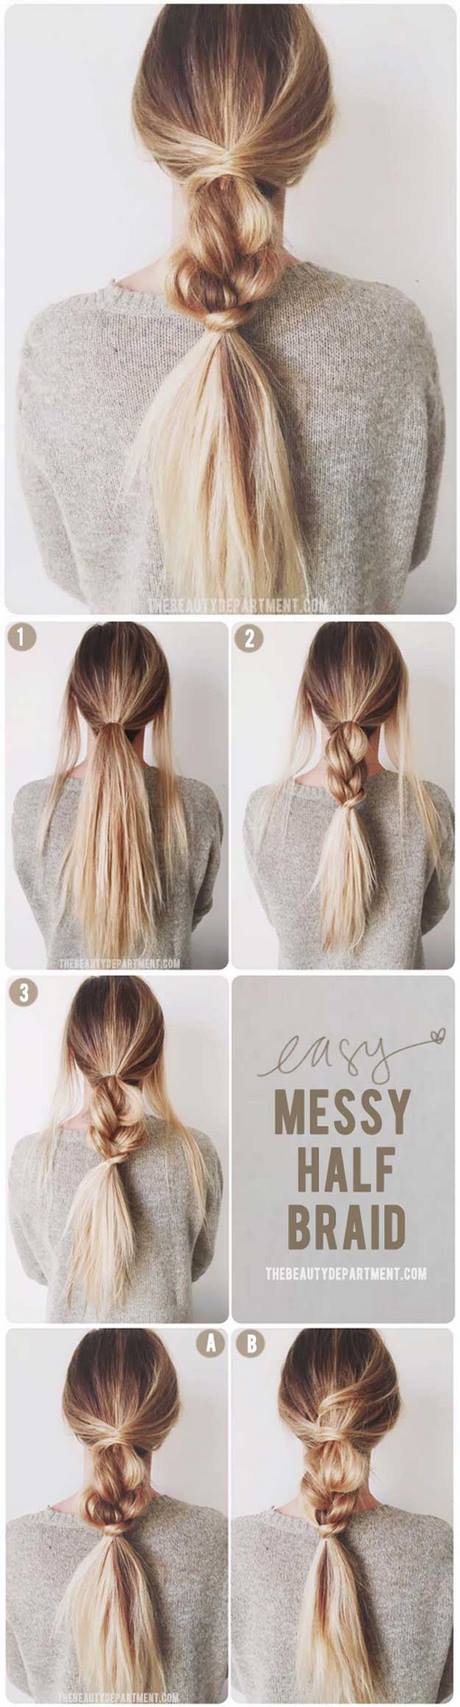 Easy hairstyles for medium length hair for teenagers easy-hairstyles-for-medium-length-hair-for-teenagers-13_11